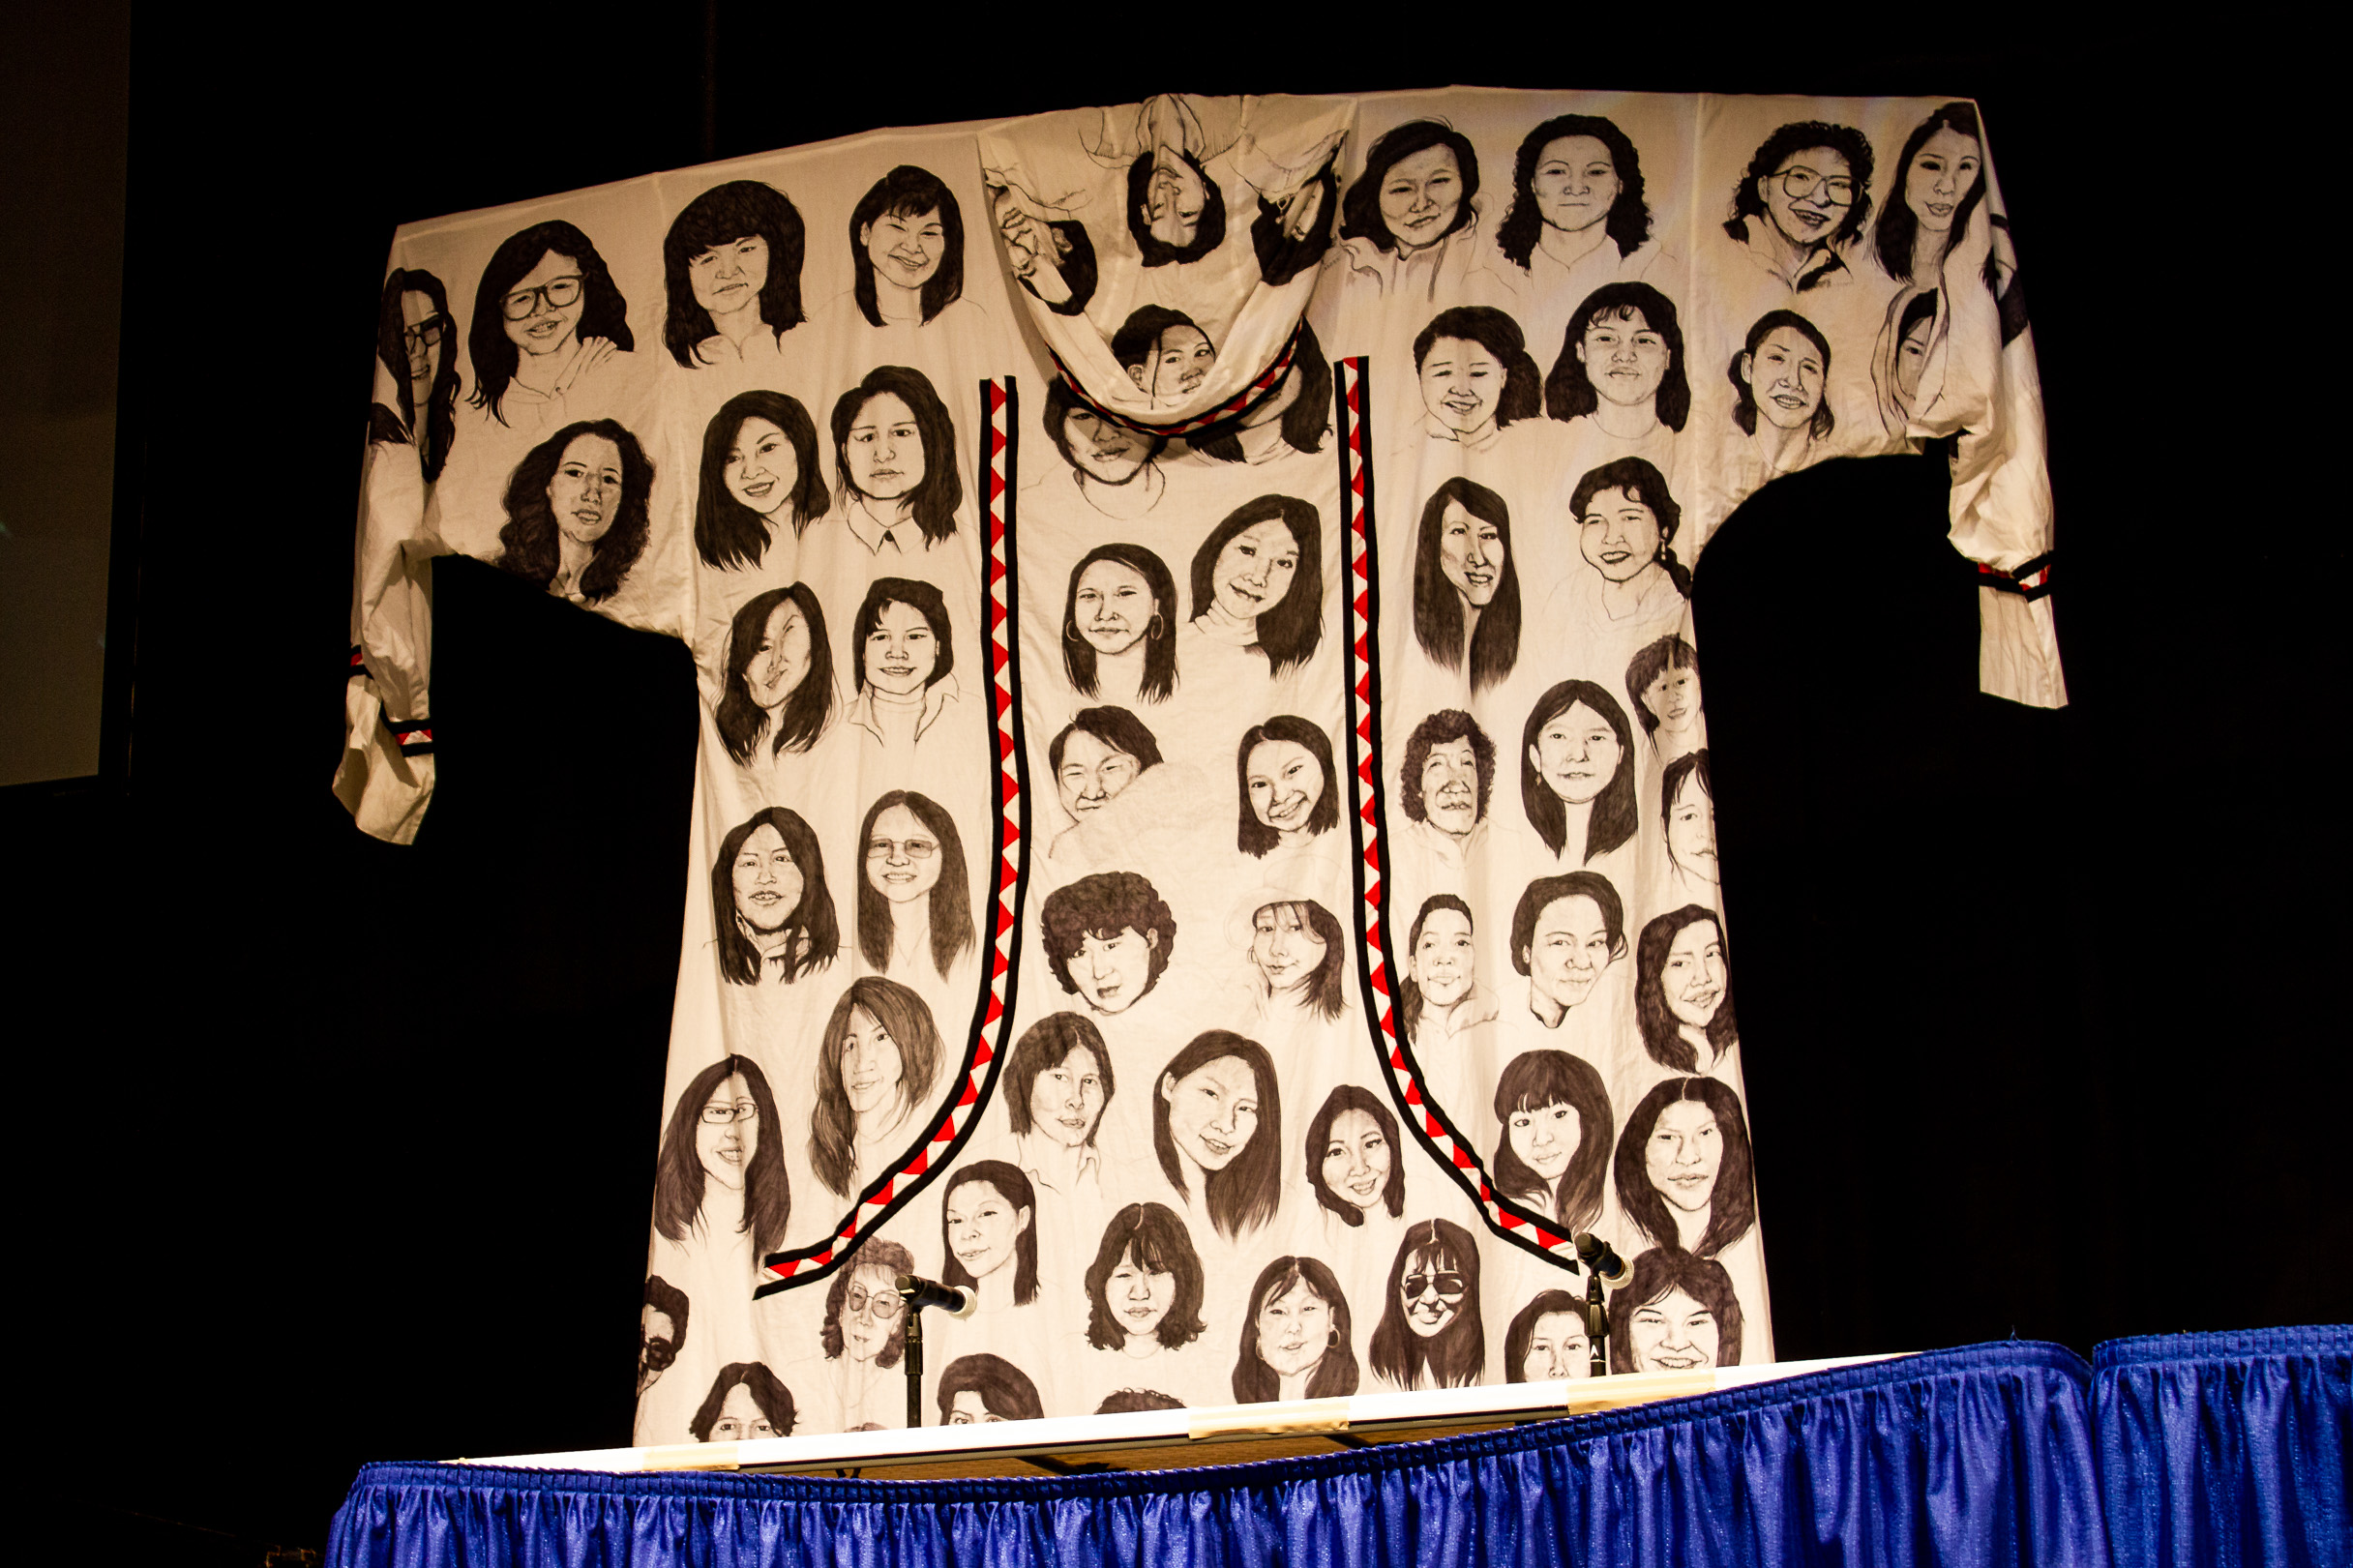 A photo of an art piece, a qaspeq with painted faces of women, hung at 2019 Alaska Federation of Natives.